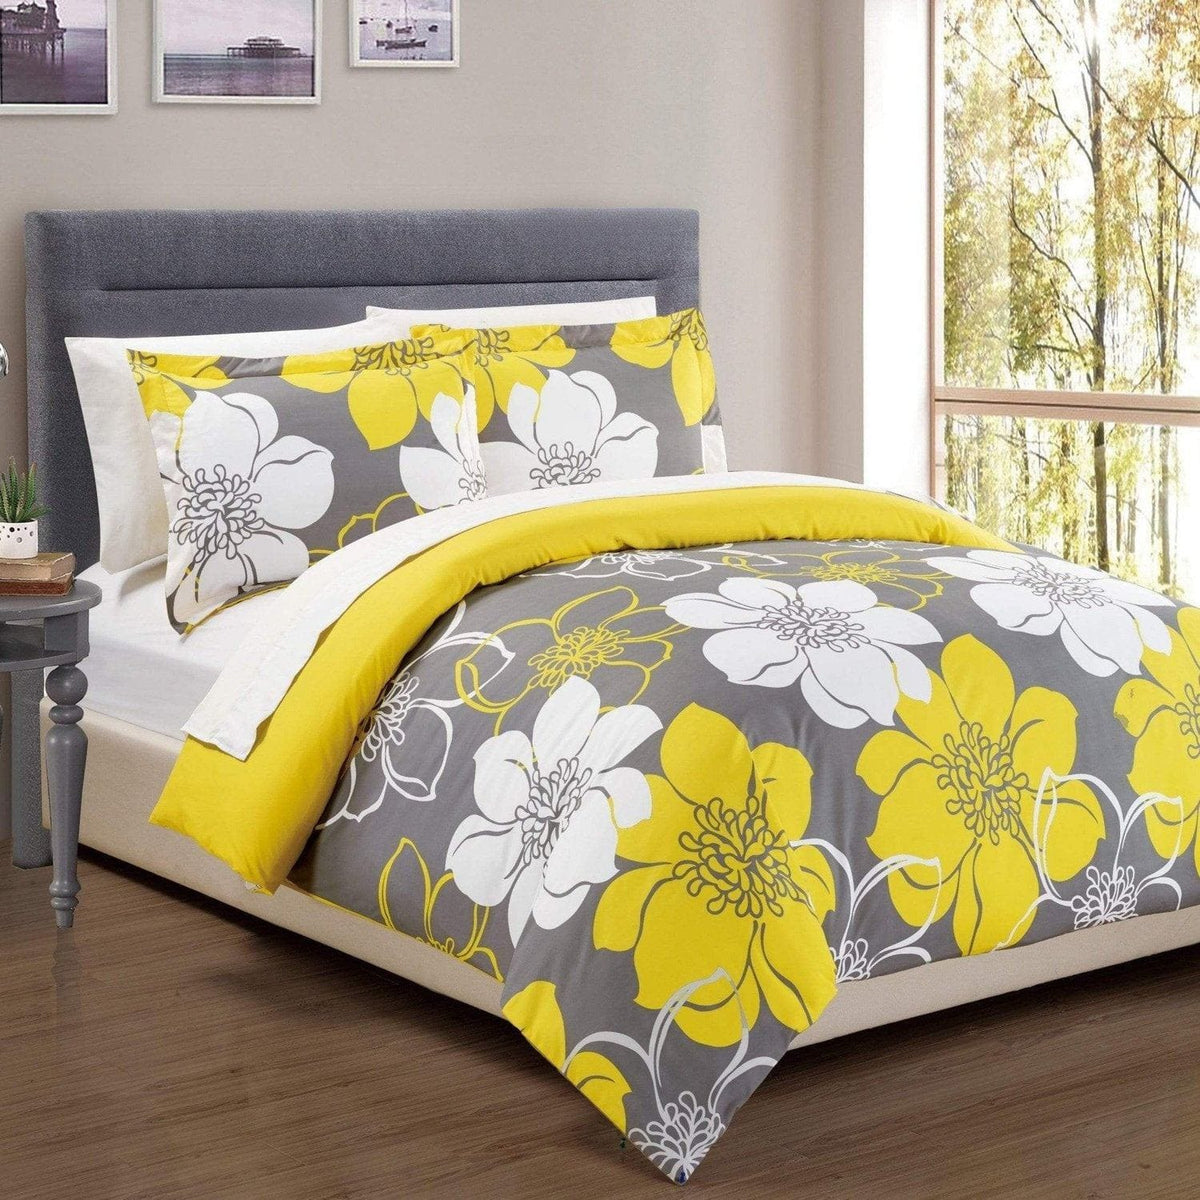 Chic Home Morning Glory 7 Piece Floral Duvet Cover Set Yellow